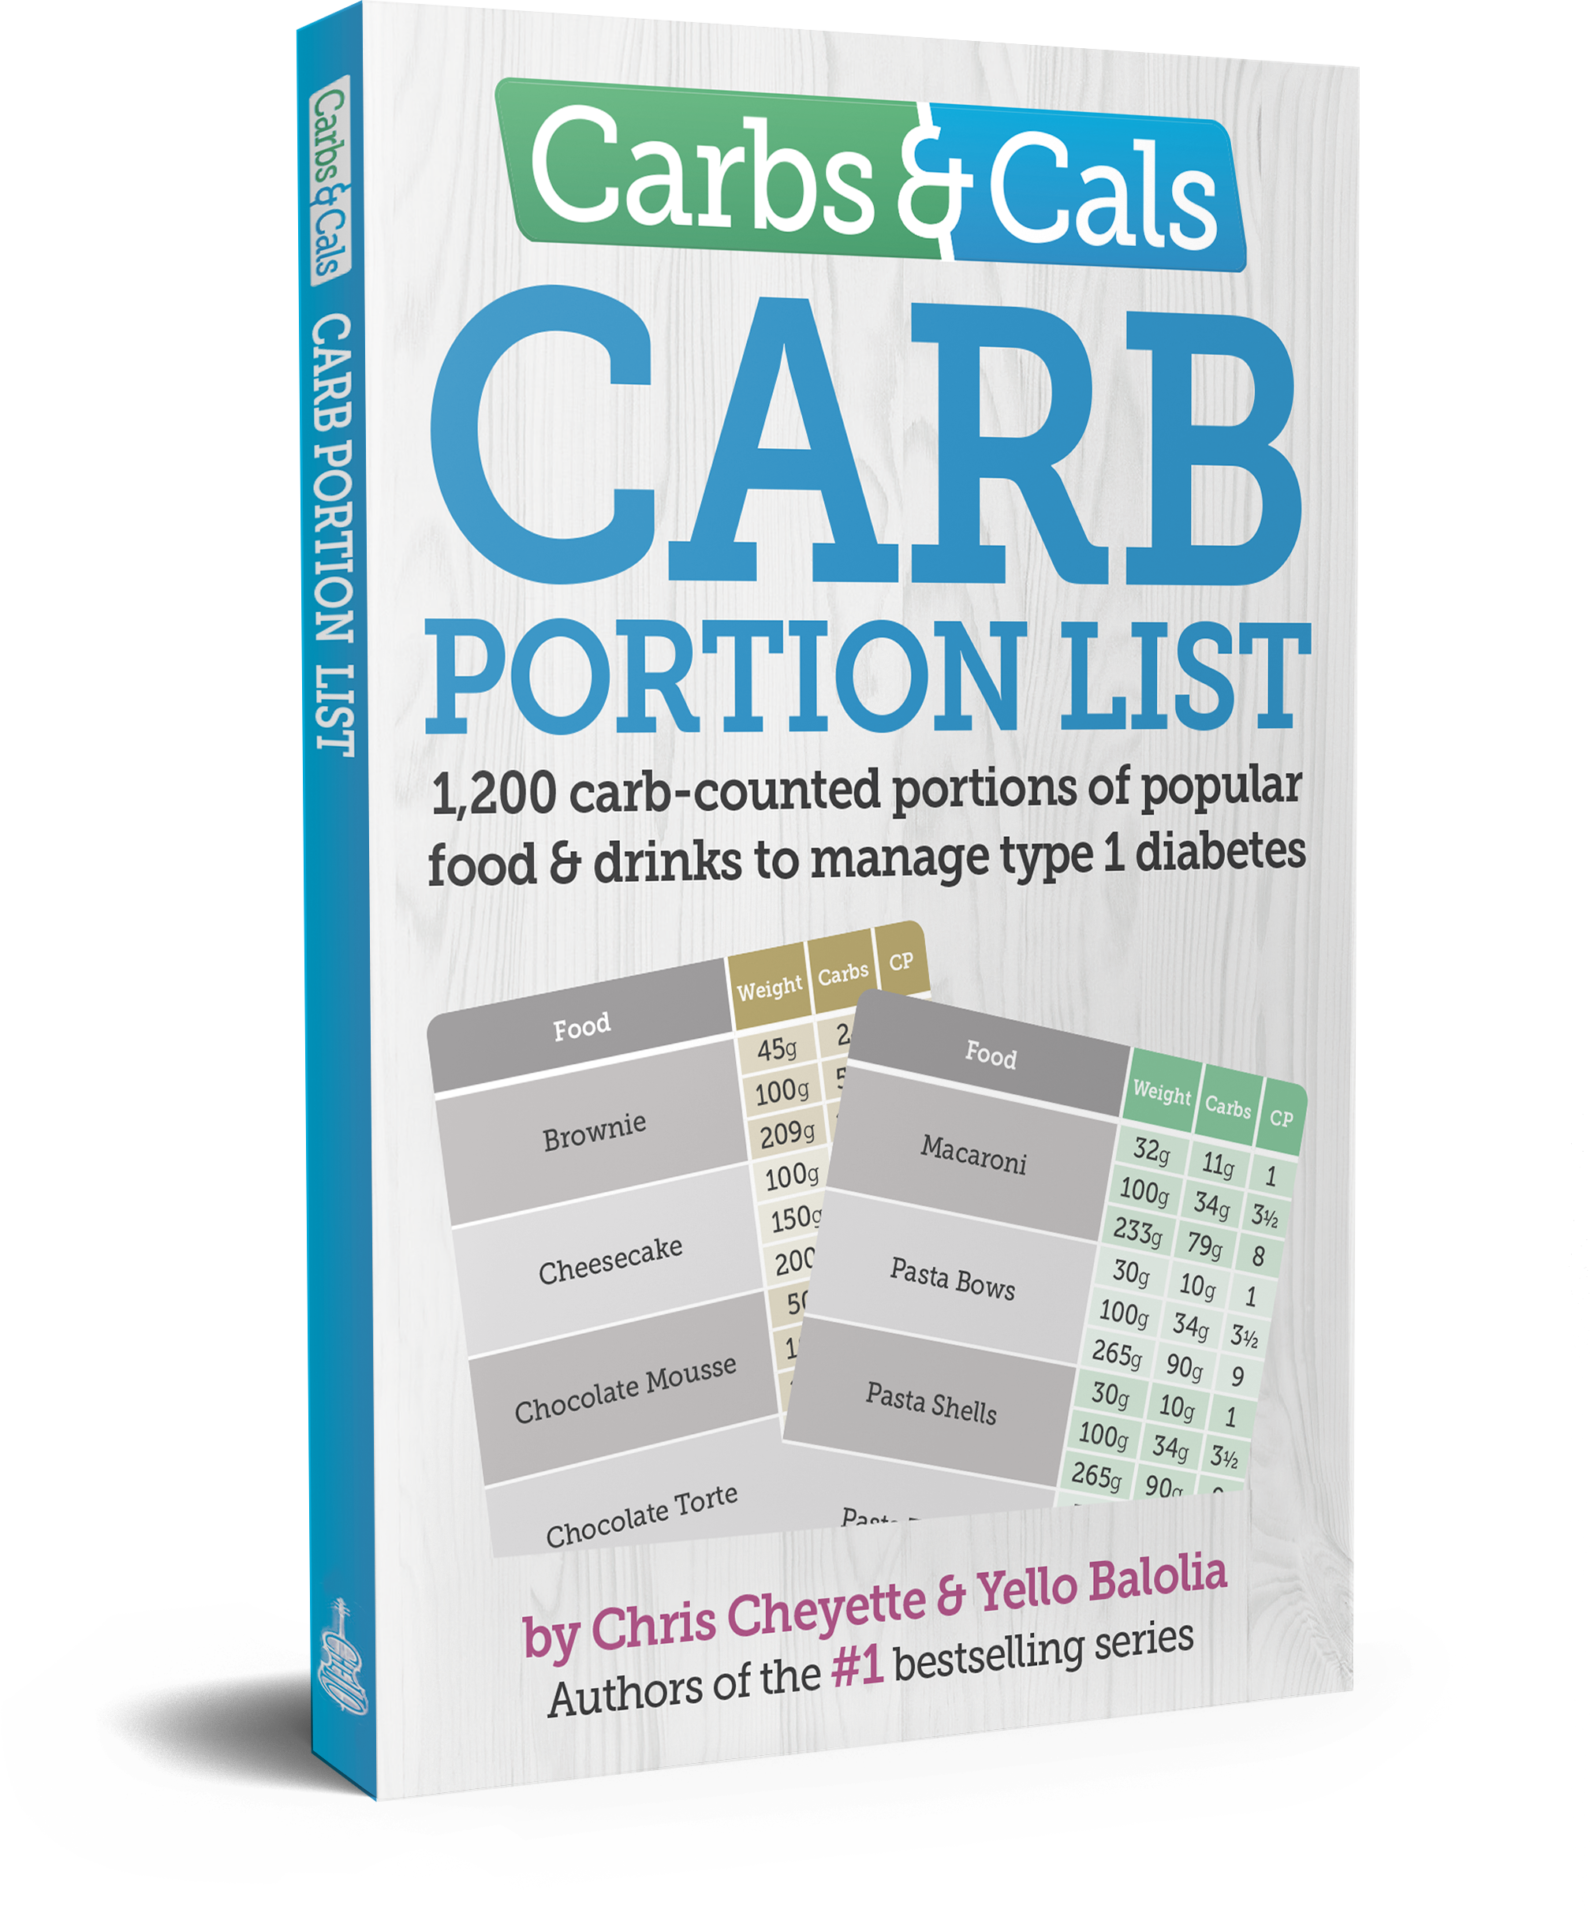 Carbs & Cals Carb Portion List Booklet Cover